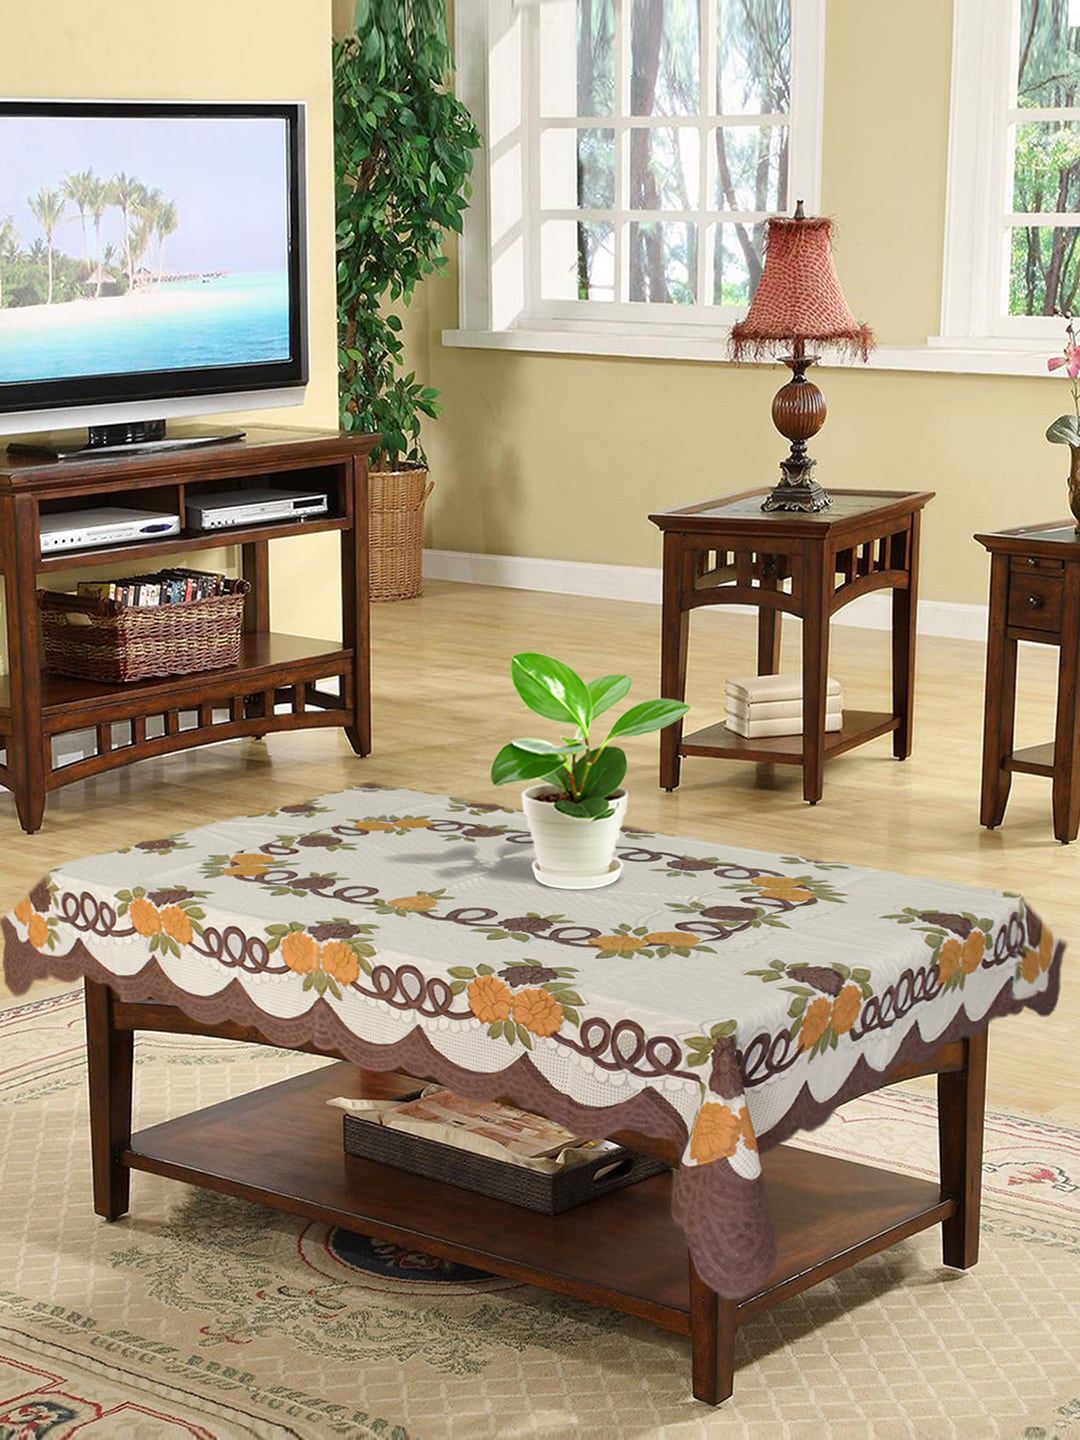 Kuber Industries Cream & Brown Printed 4-Seater Rectangular Table Cover Price in India